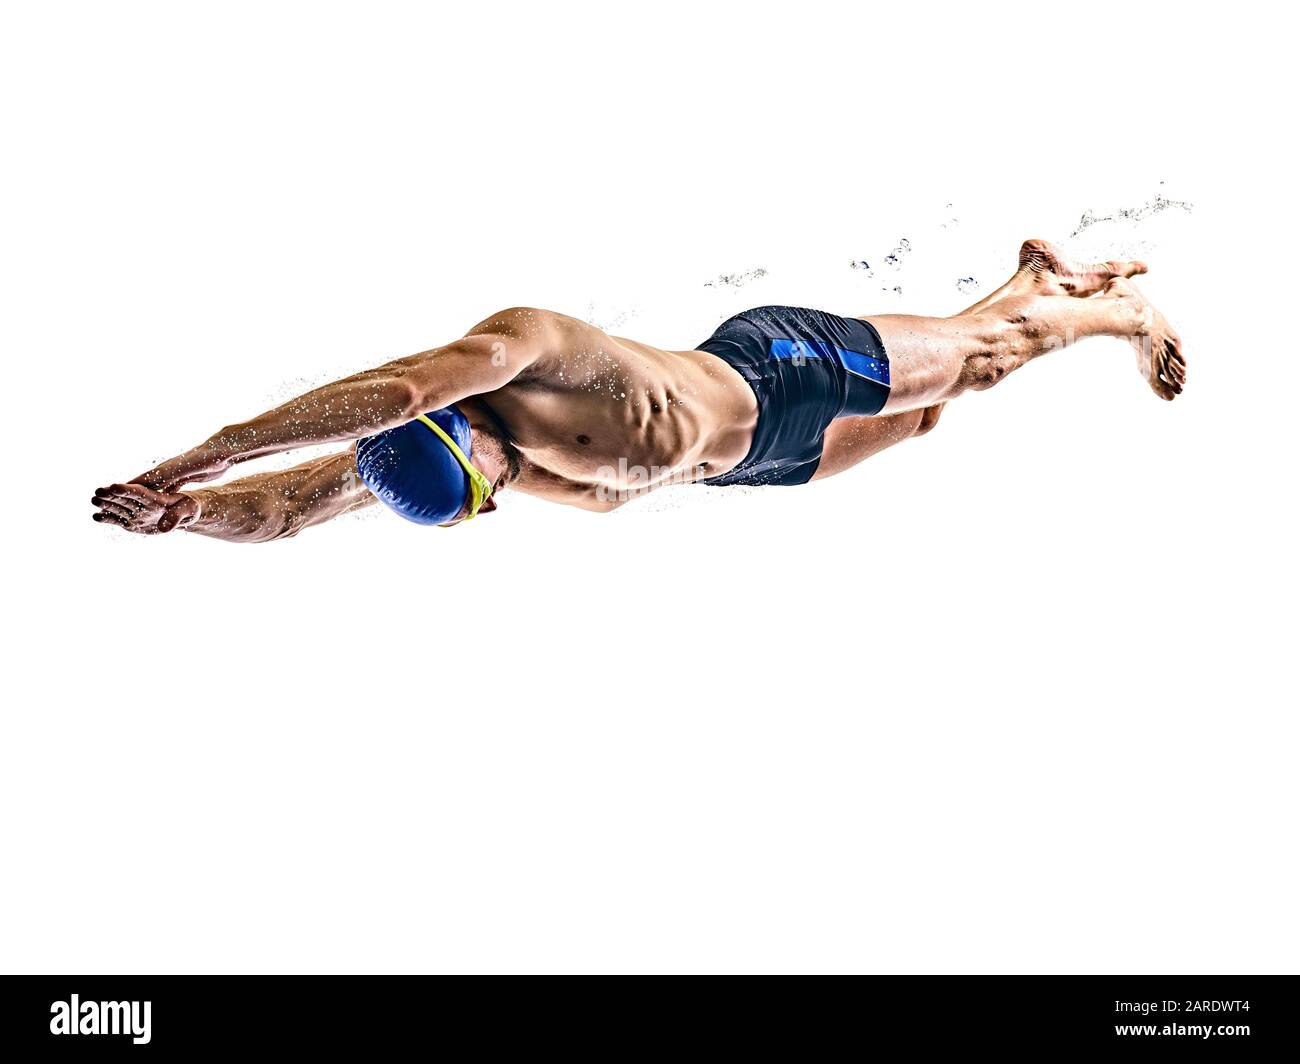 one caucasian man sport swimmer swimming silhouette isolated on white background Stock Photo